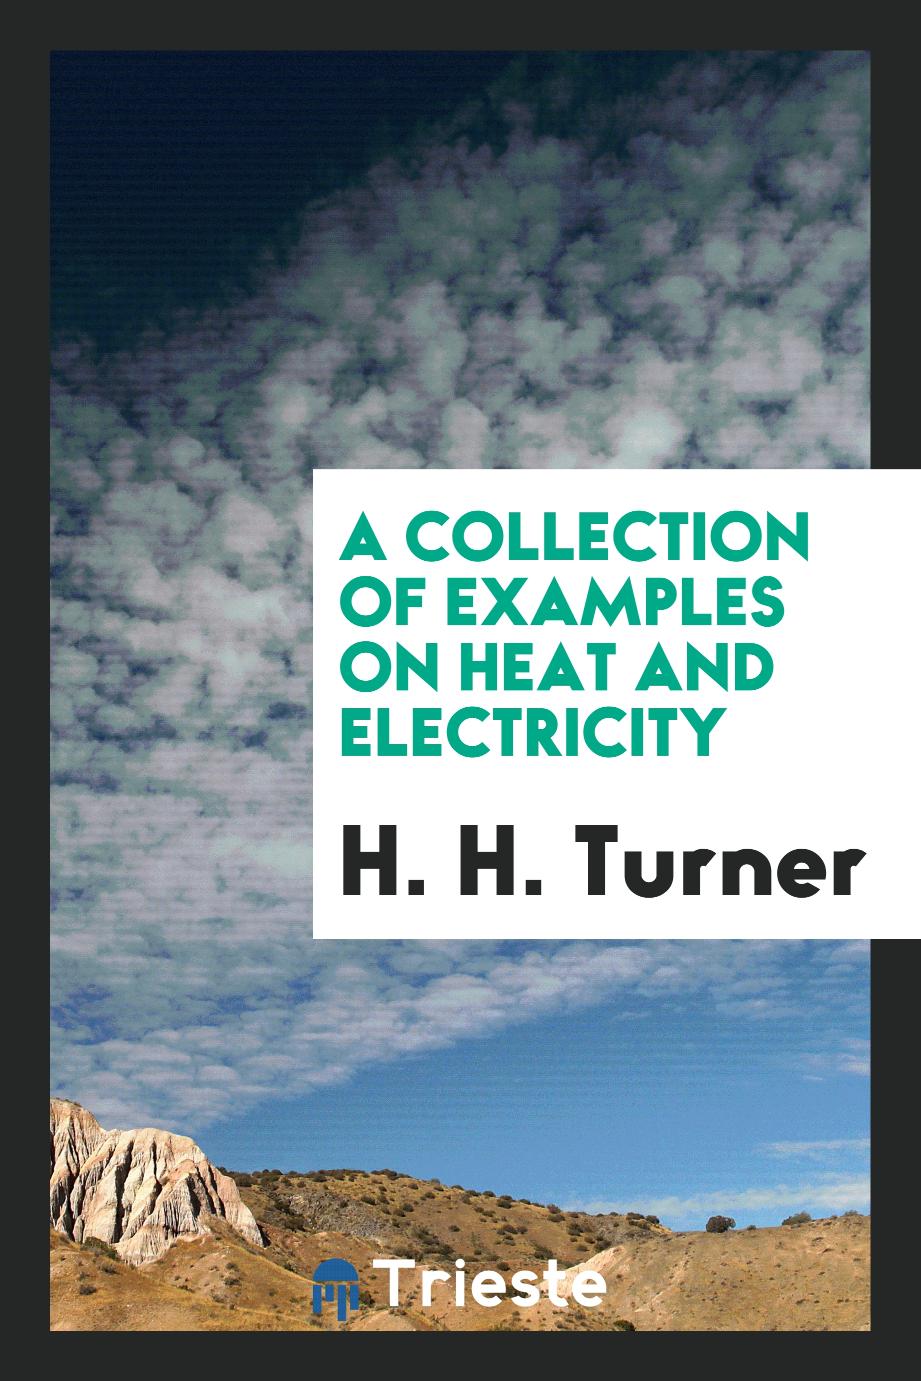 A collection of examples on heat and electricity